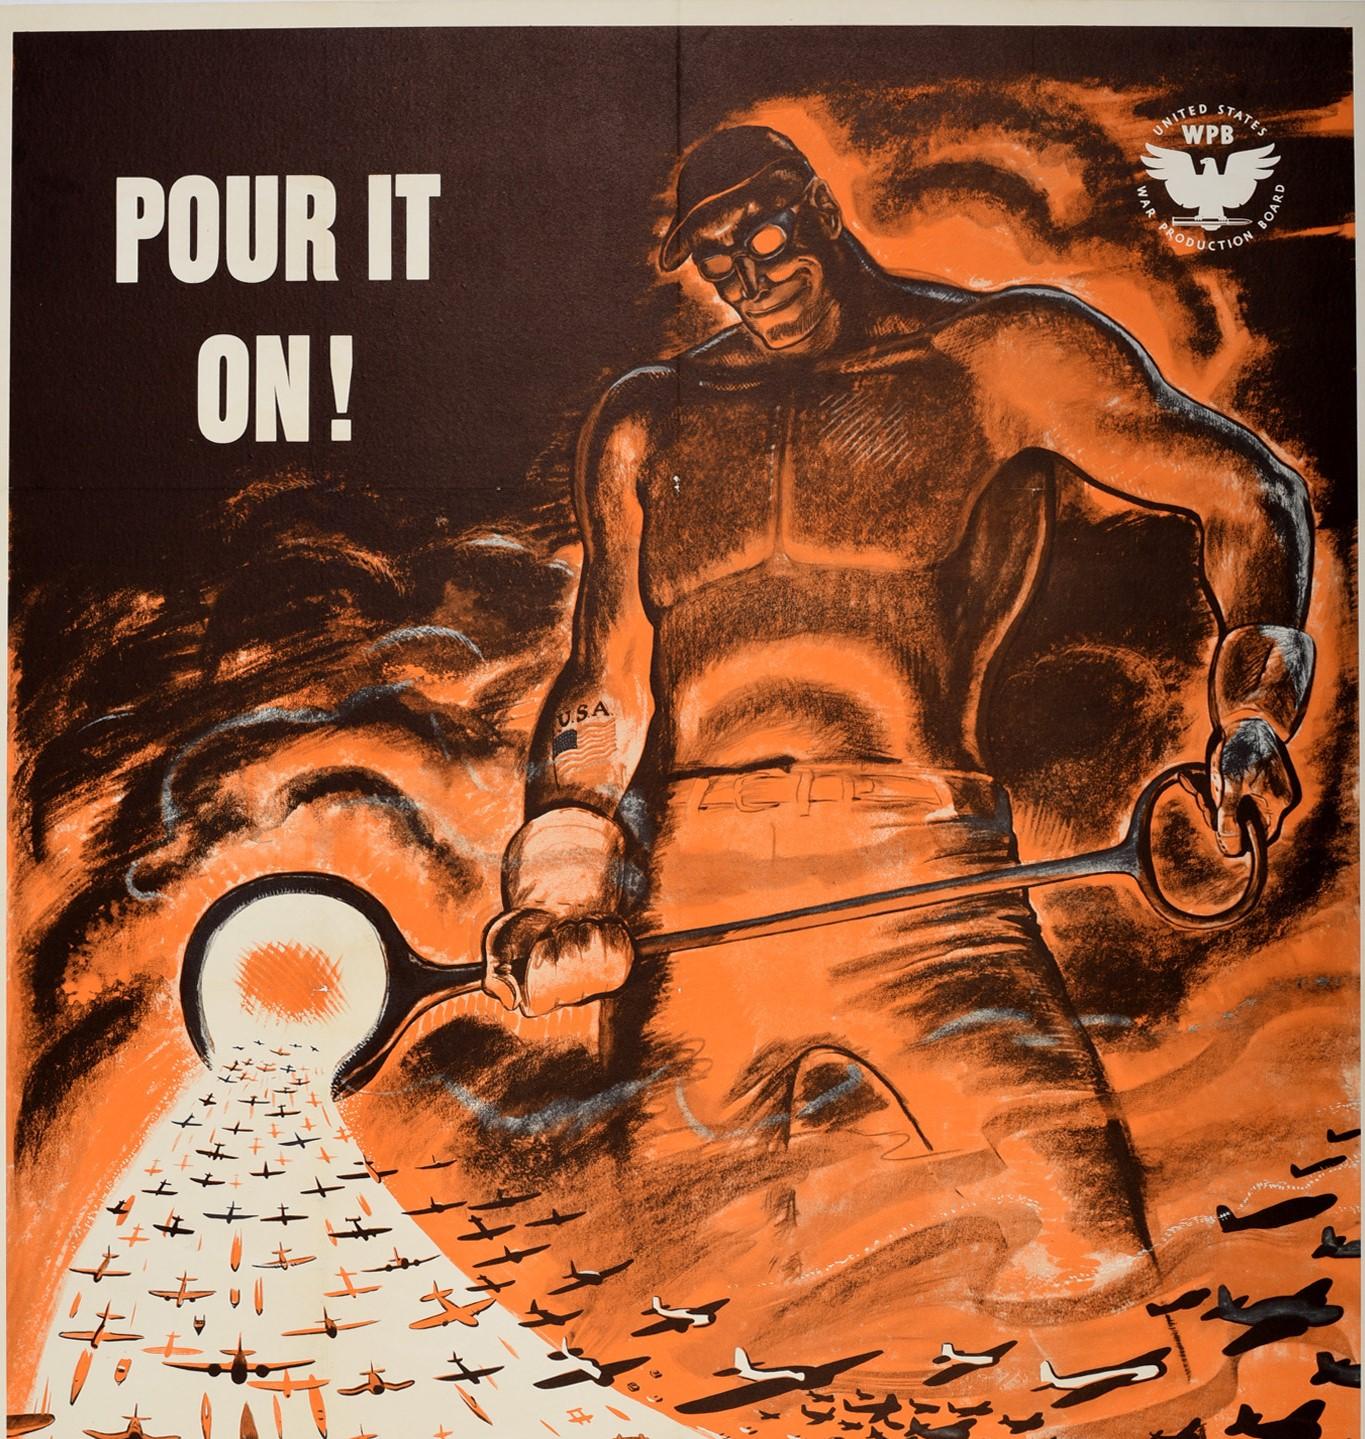 Original Vintage Poster Pour It On WWII Industry Military US War Production WPB - Print by William Garrett Price